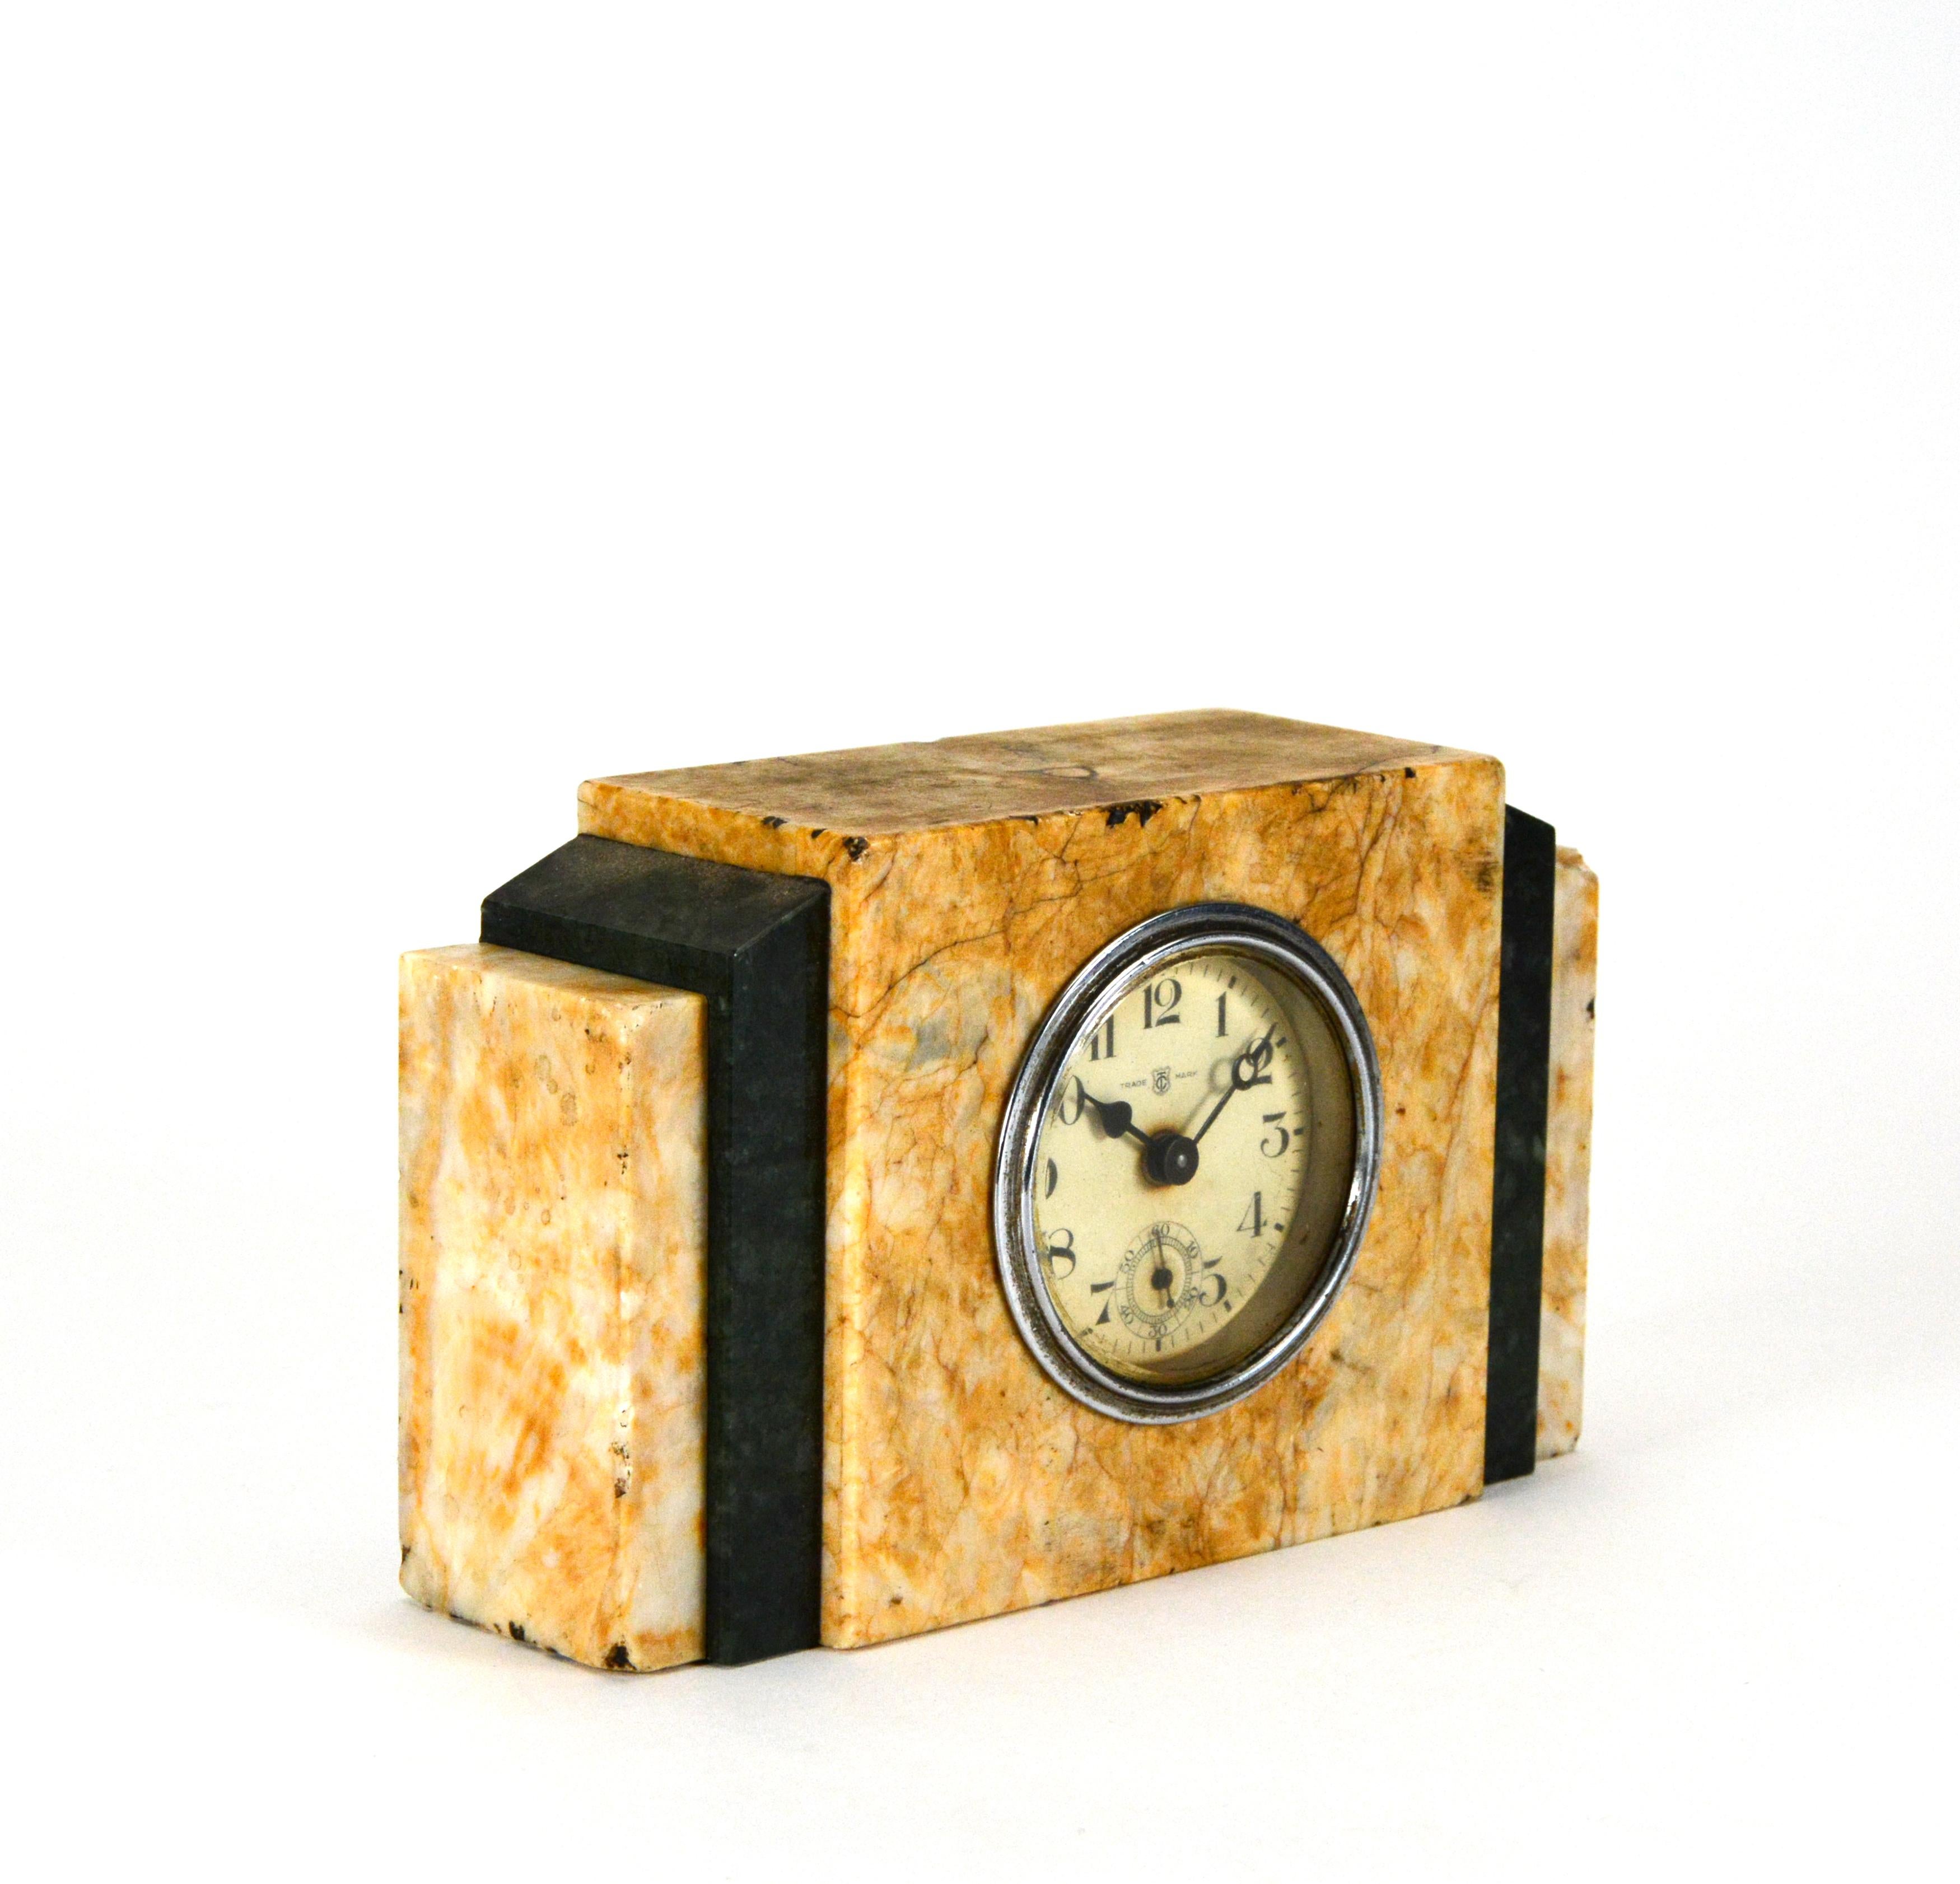 1920s vintage Miniature French marble case Art Deco clock with second hand dial

Here is a French miniature table clock. The maker marked on the dial. It measures around 3-5/8